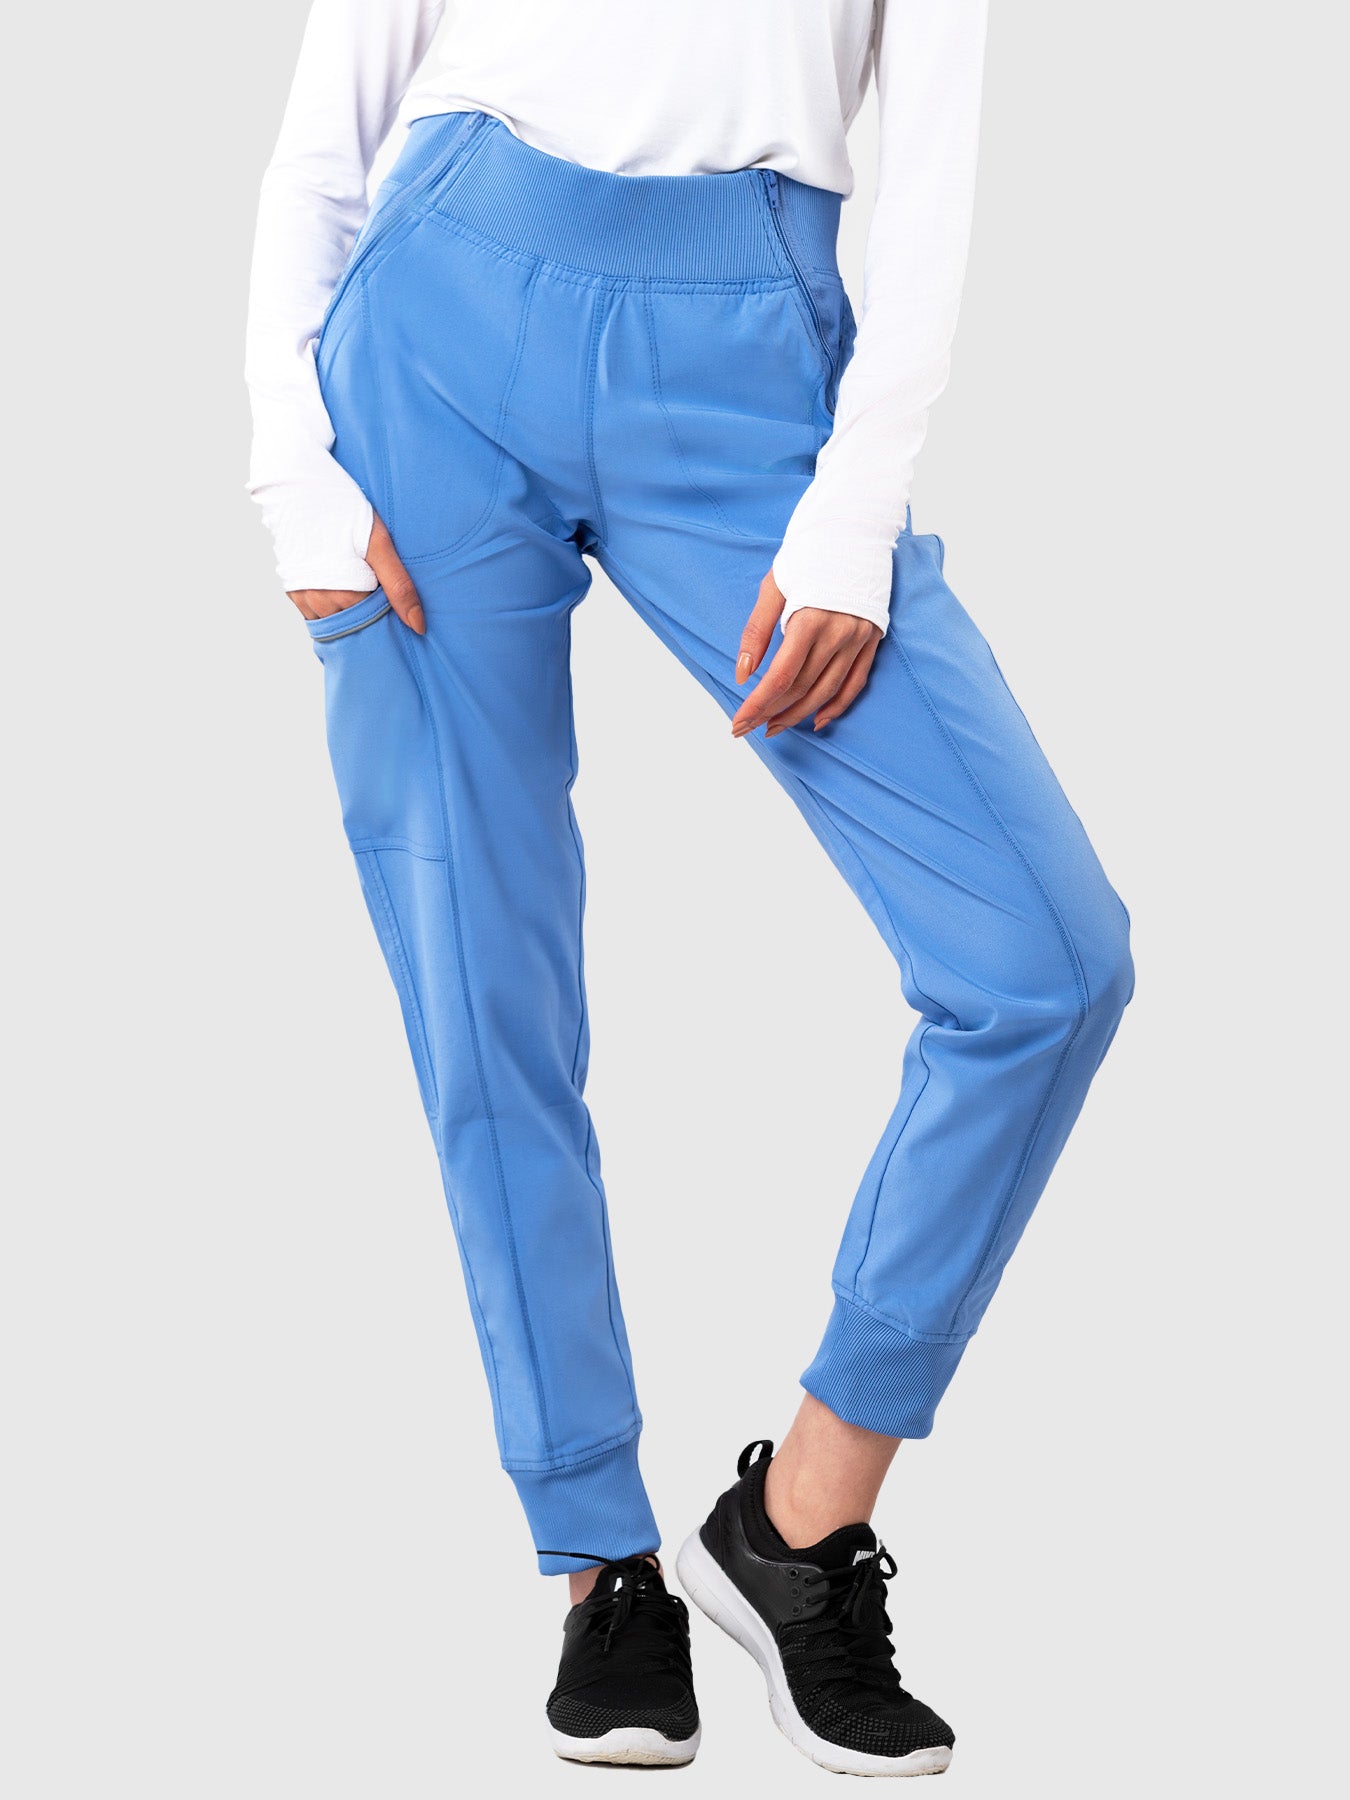 Women's Relaxed Scrub Pants - Periwinkle – Rhino Scrubs Official